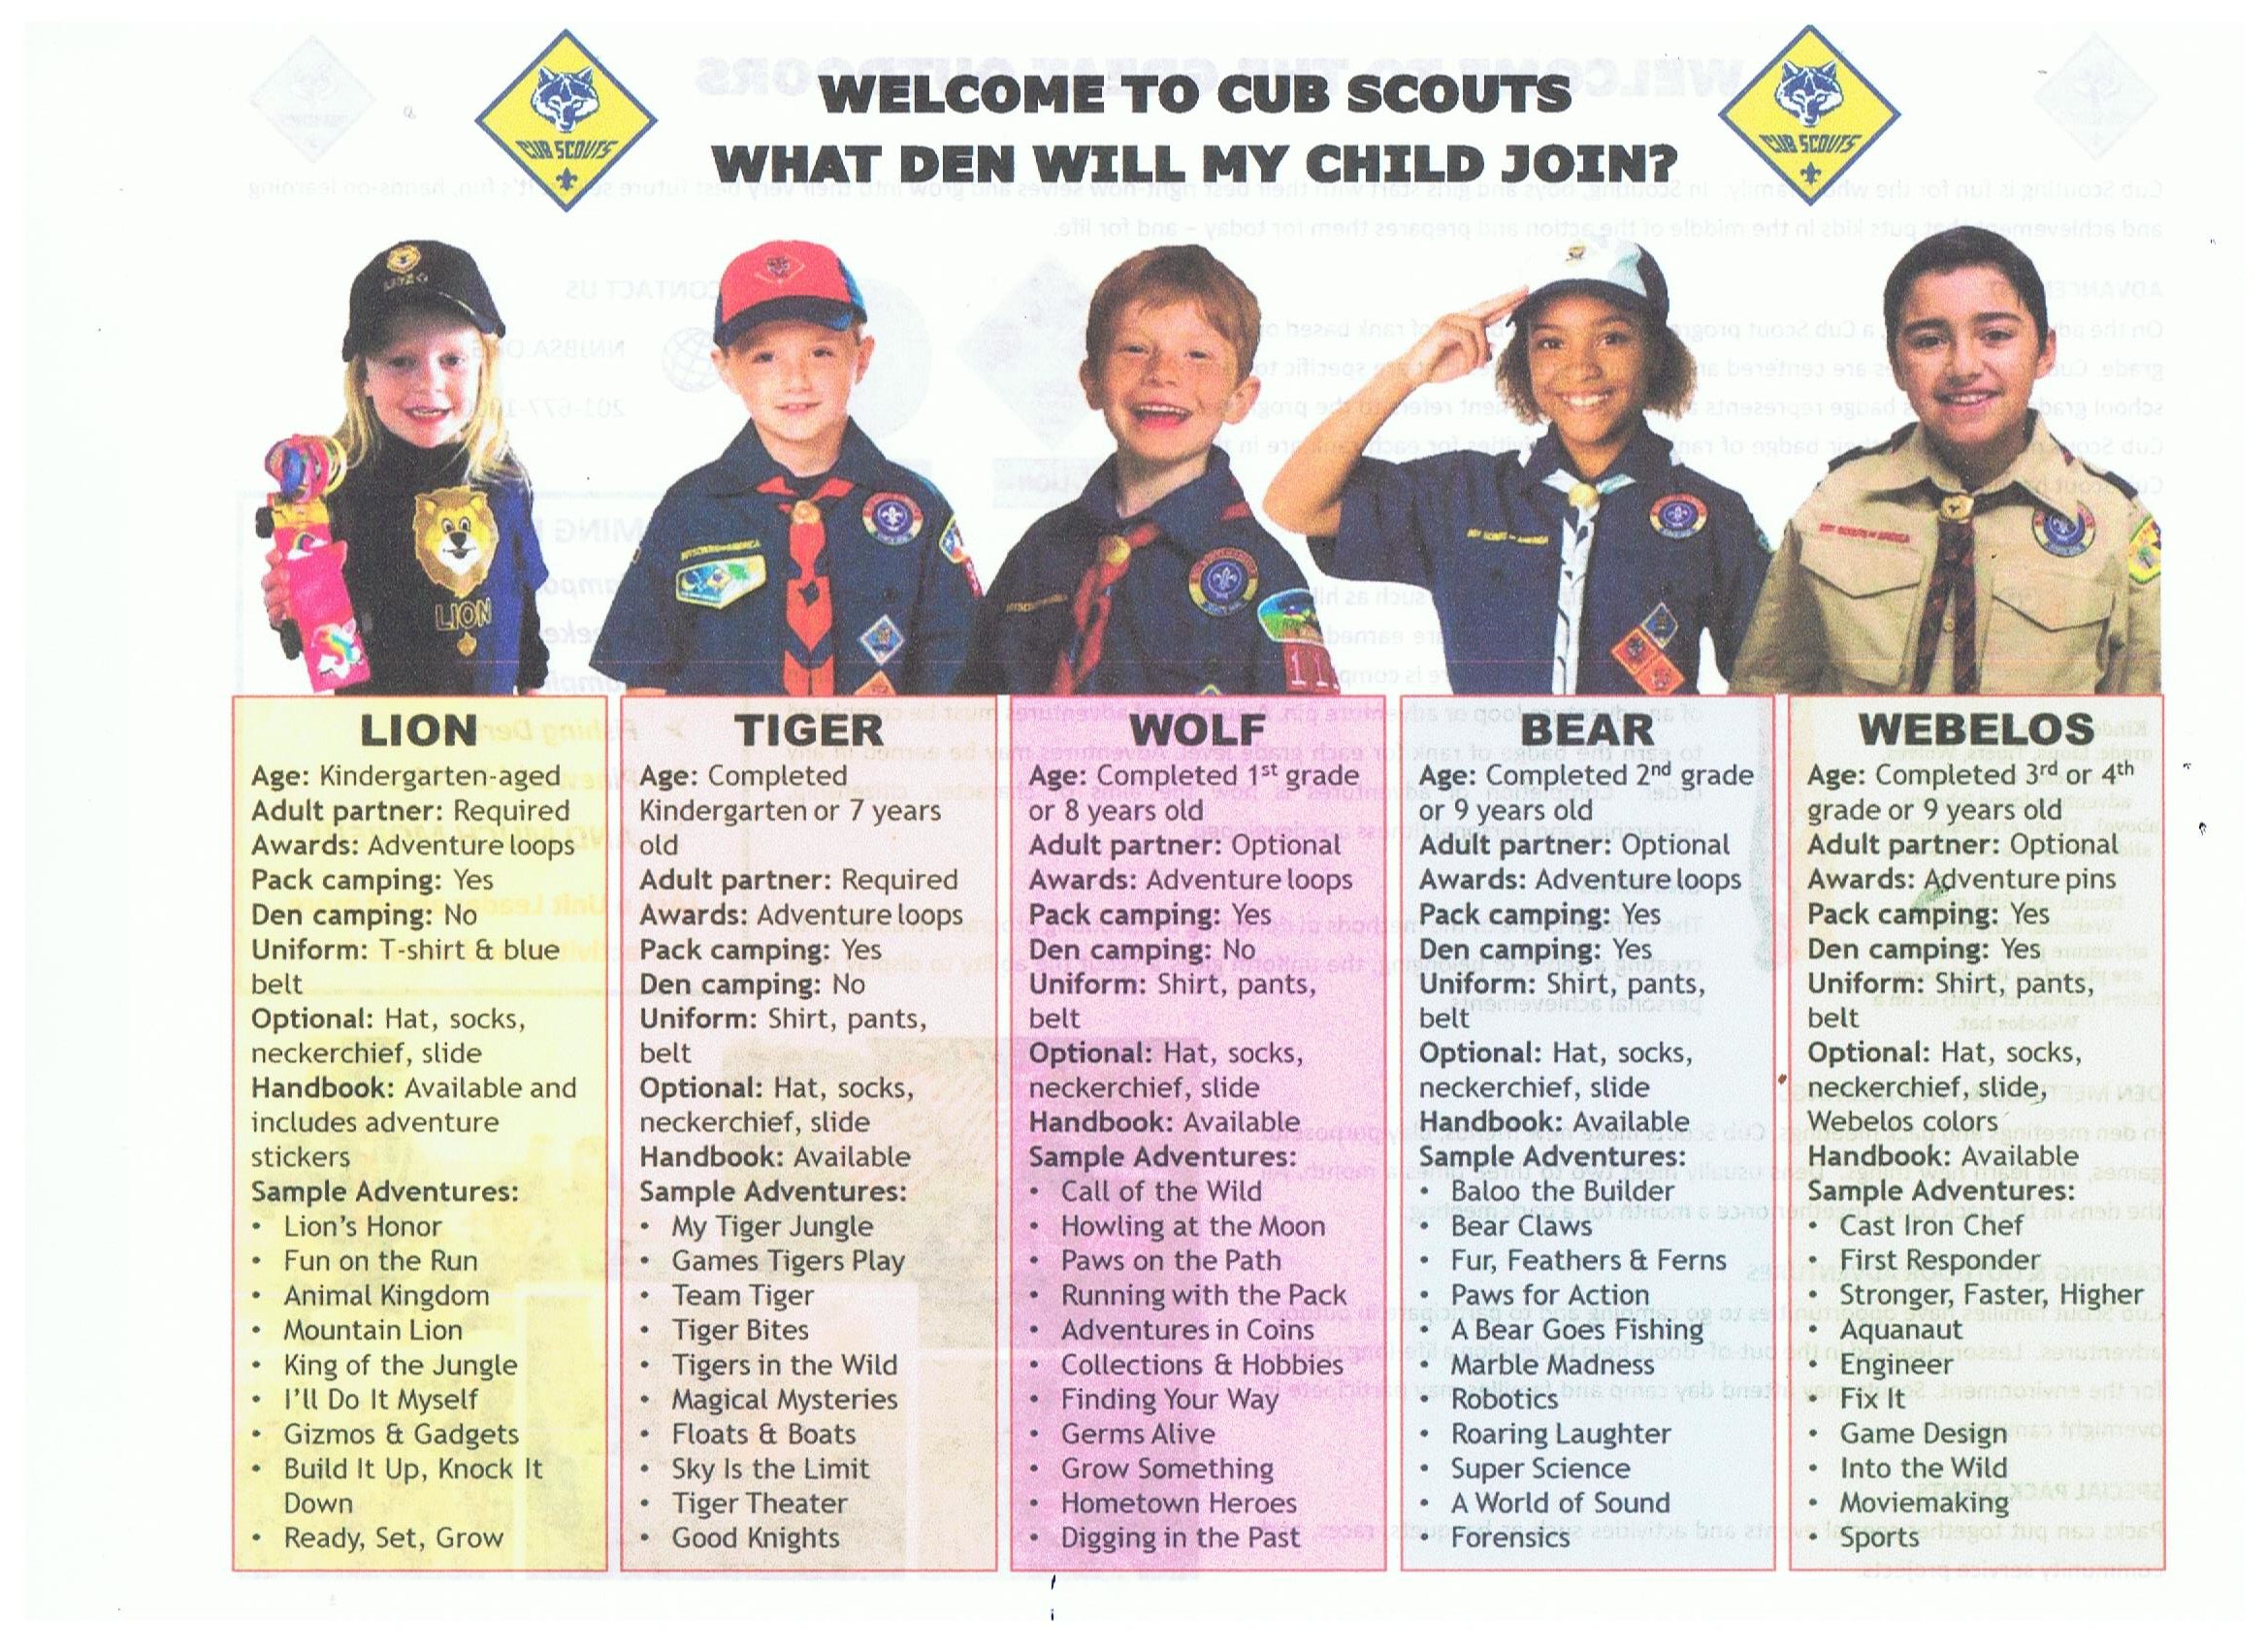 Text: Welcome to Cub Scouts What Den Will my Child Join? Image of Cub Scouts children with information about each Den in 5 Columns.